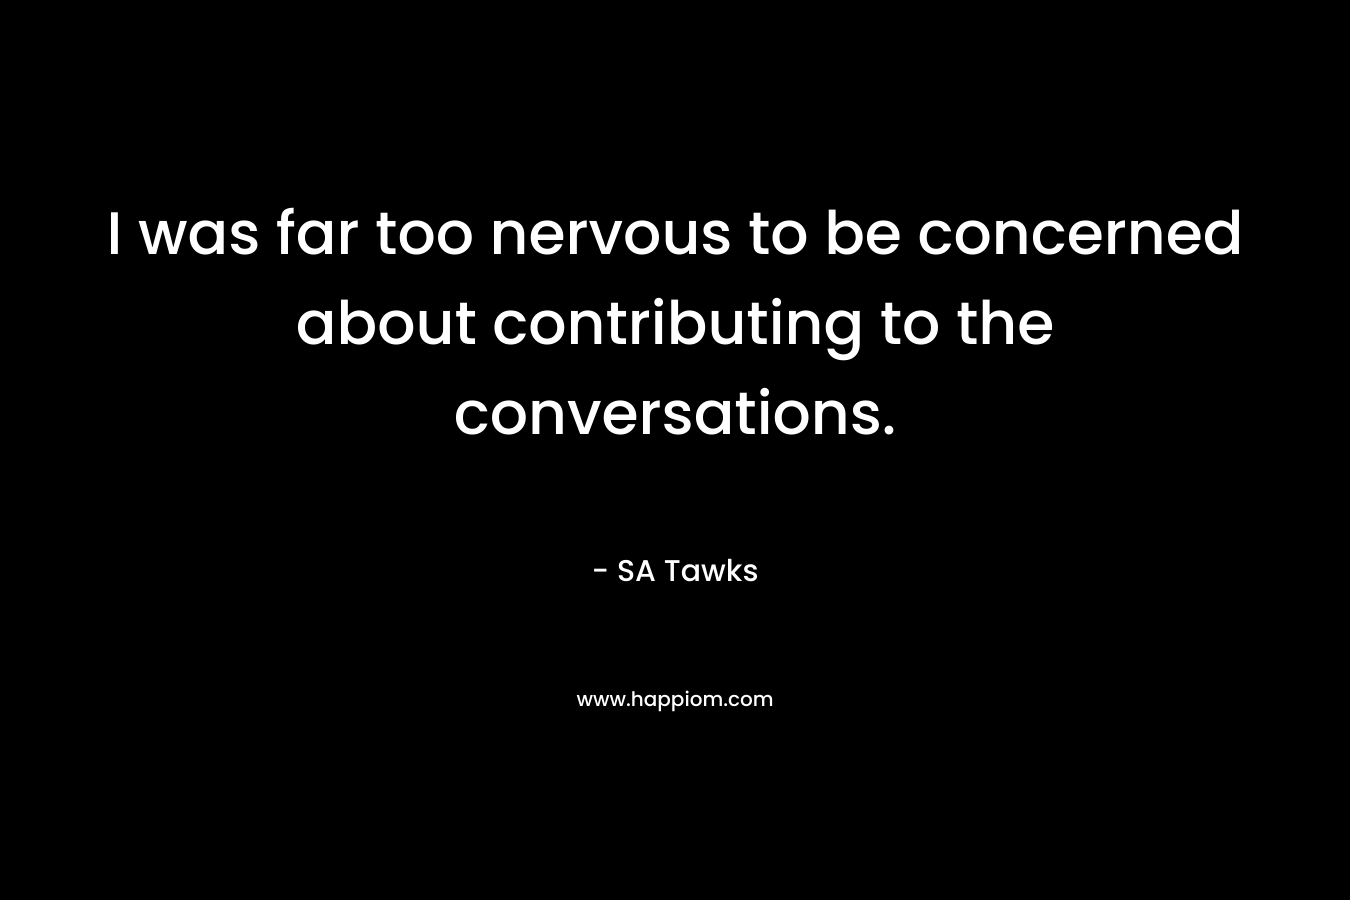 I was far too nervous to be concerned about contributing to the conversations. – SA Tawks